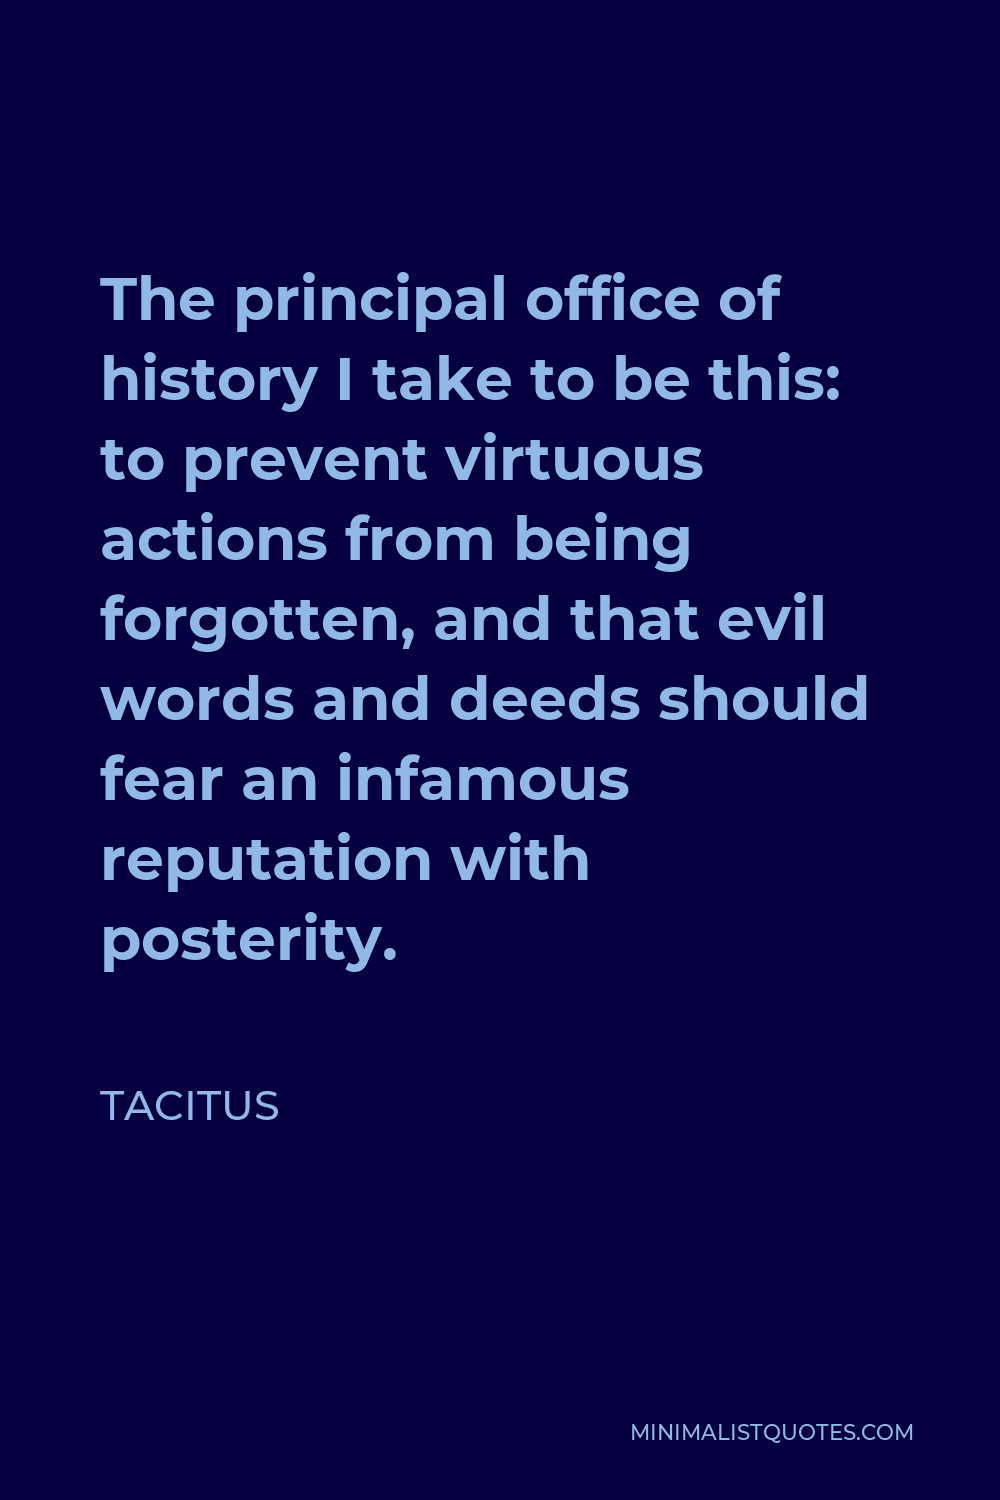 Tacitus Quote - The principal office of history I take to be this: to prevent virtuous actions from being forgotten, and that evil words and deeds should fear an infamous reputation with posterity.